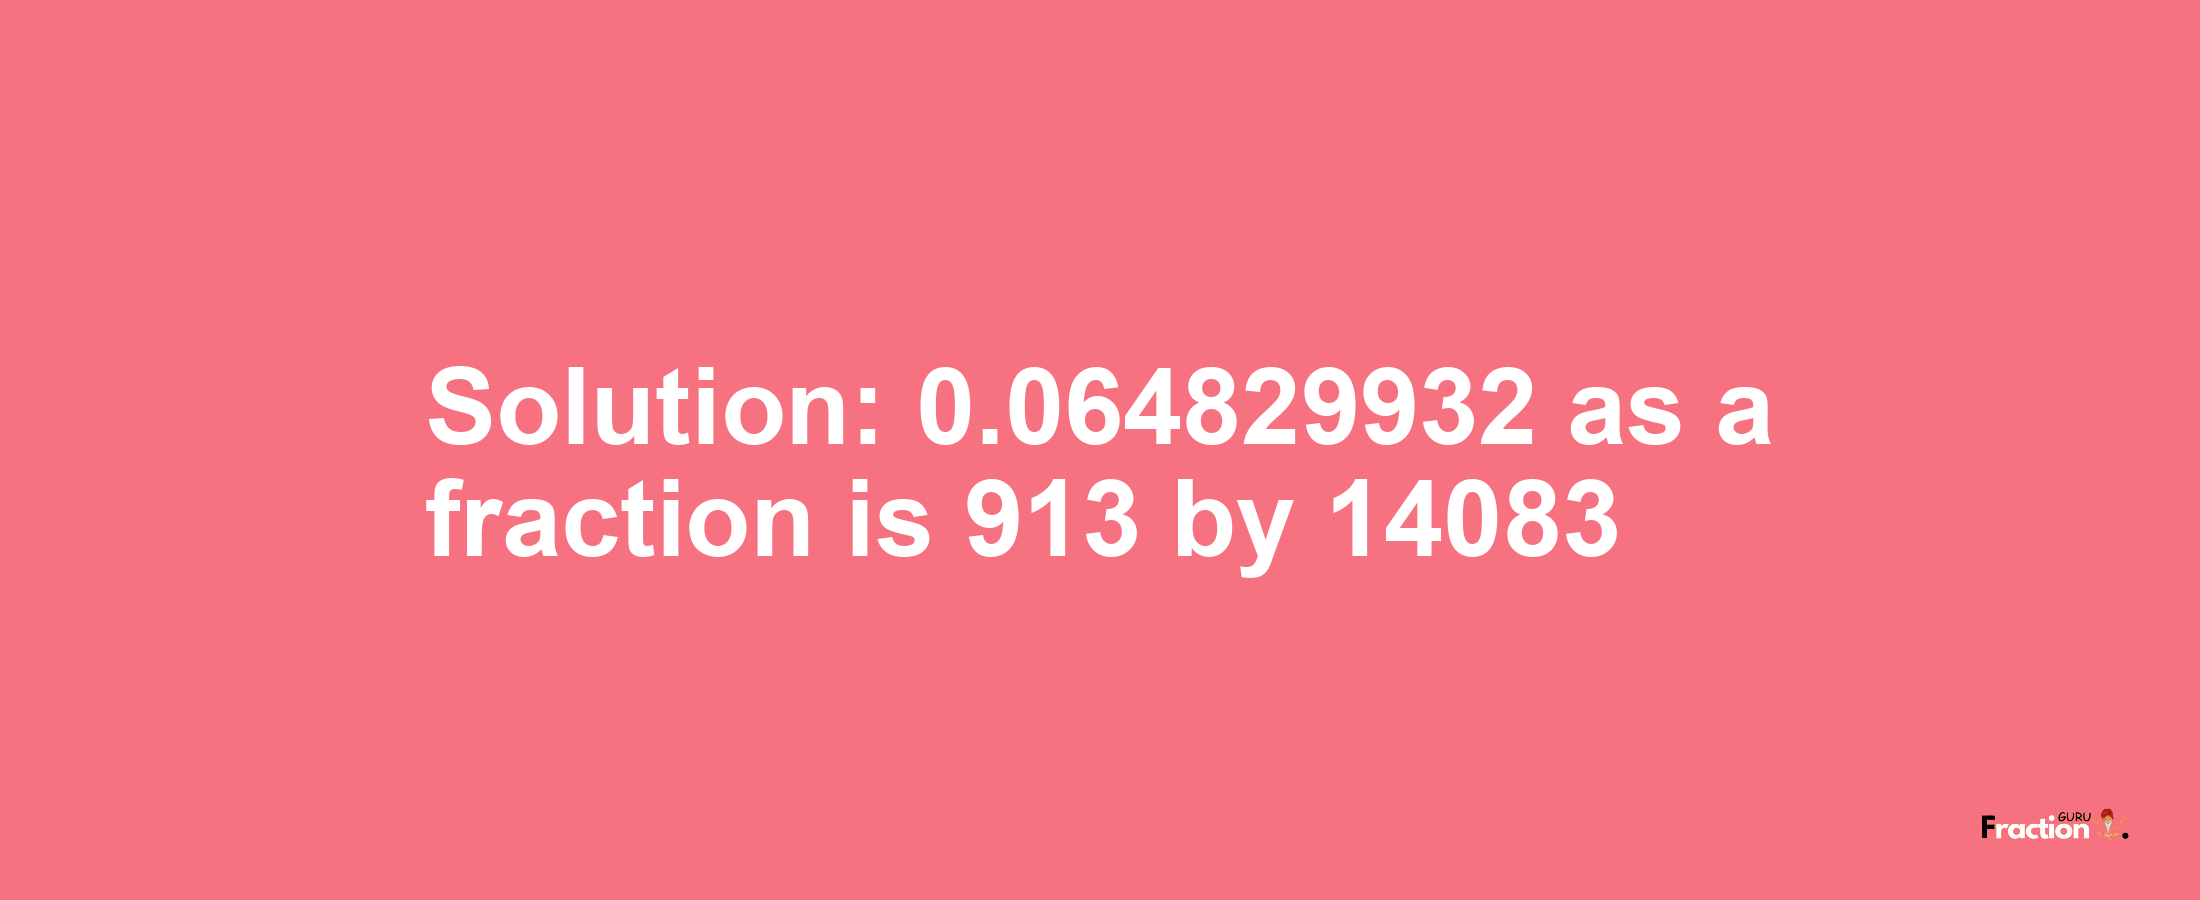 Solution:0.064829932 as a fraction is 913/14083